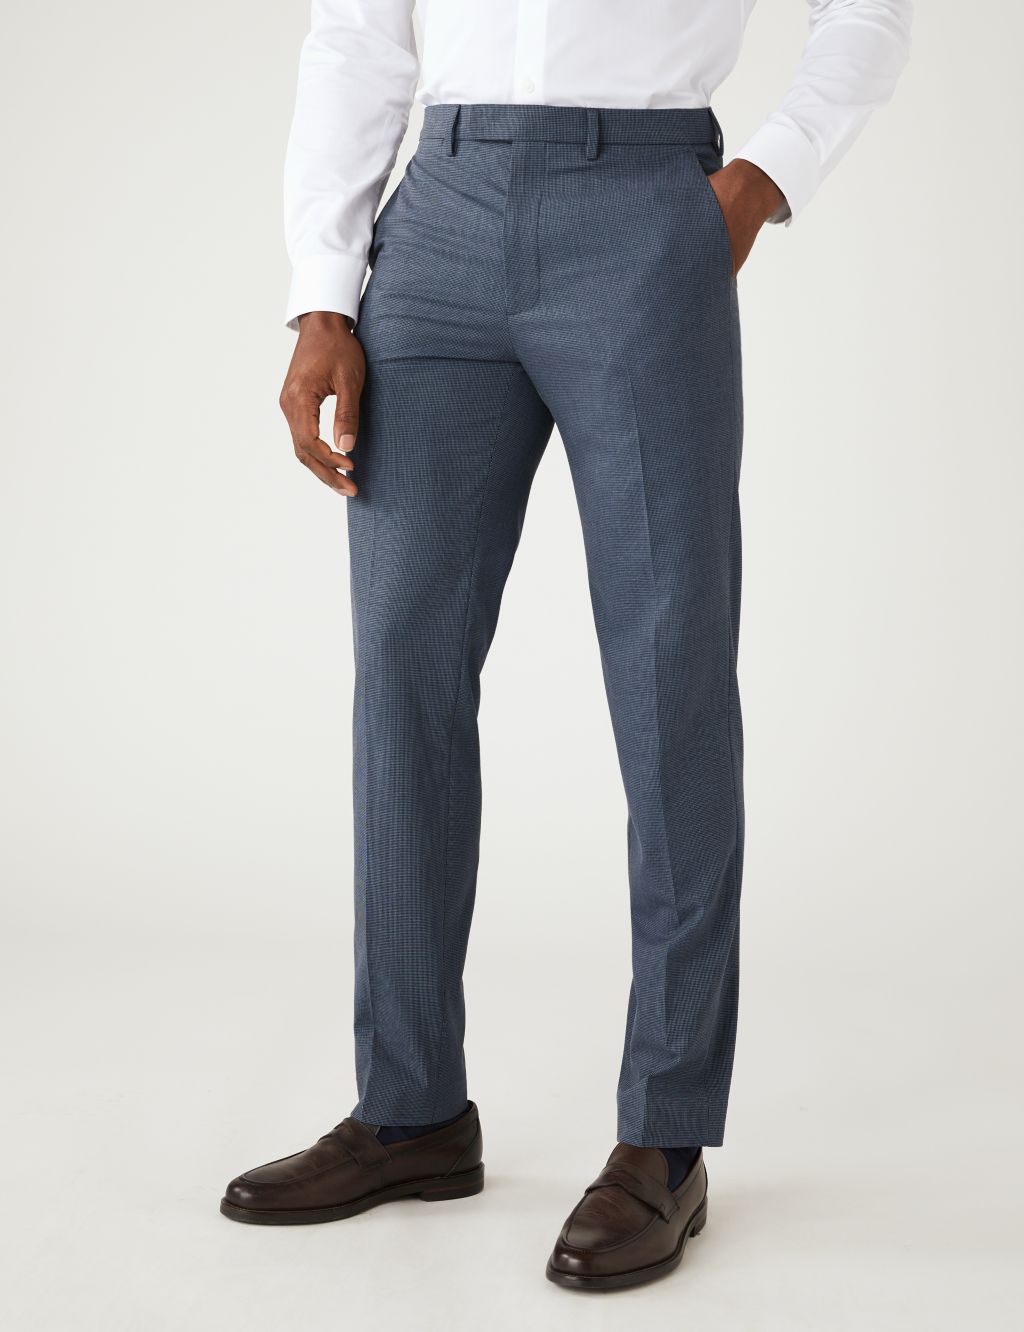 Puppytooth Stretch Trousers image 2